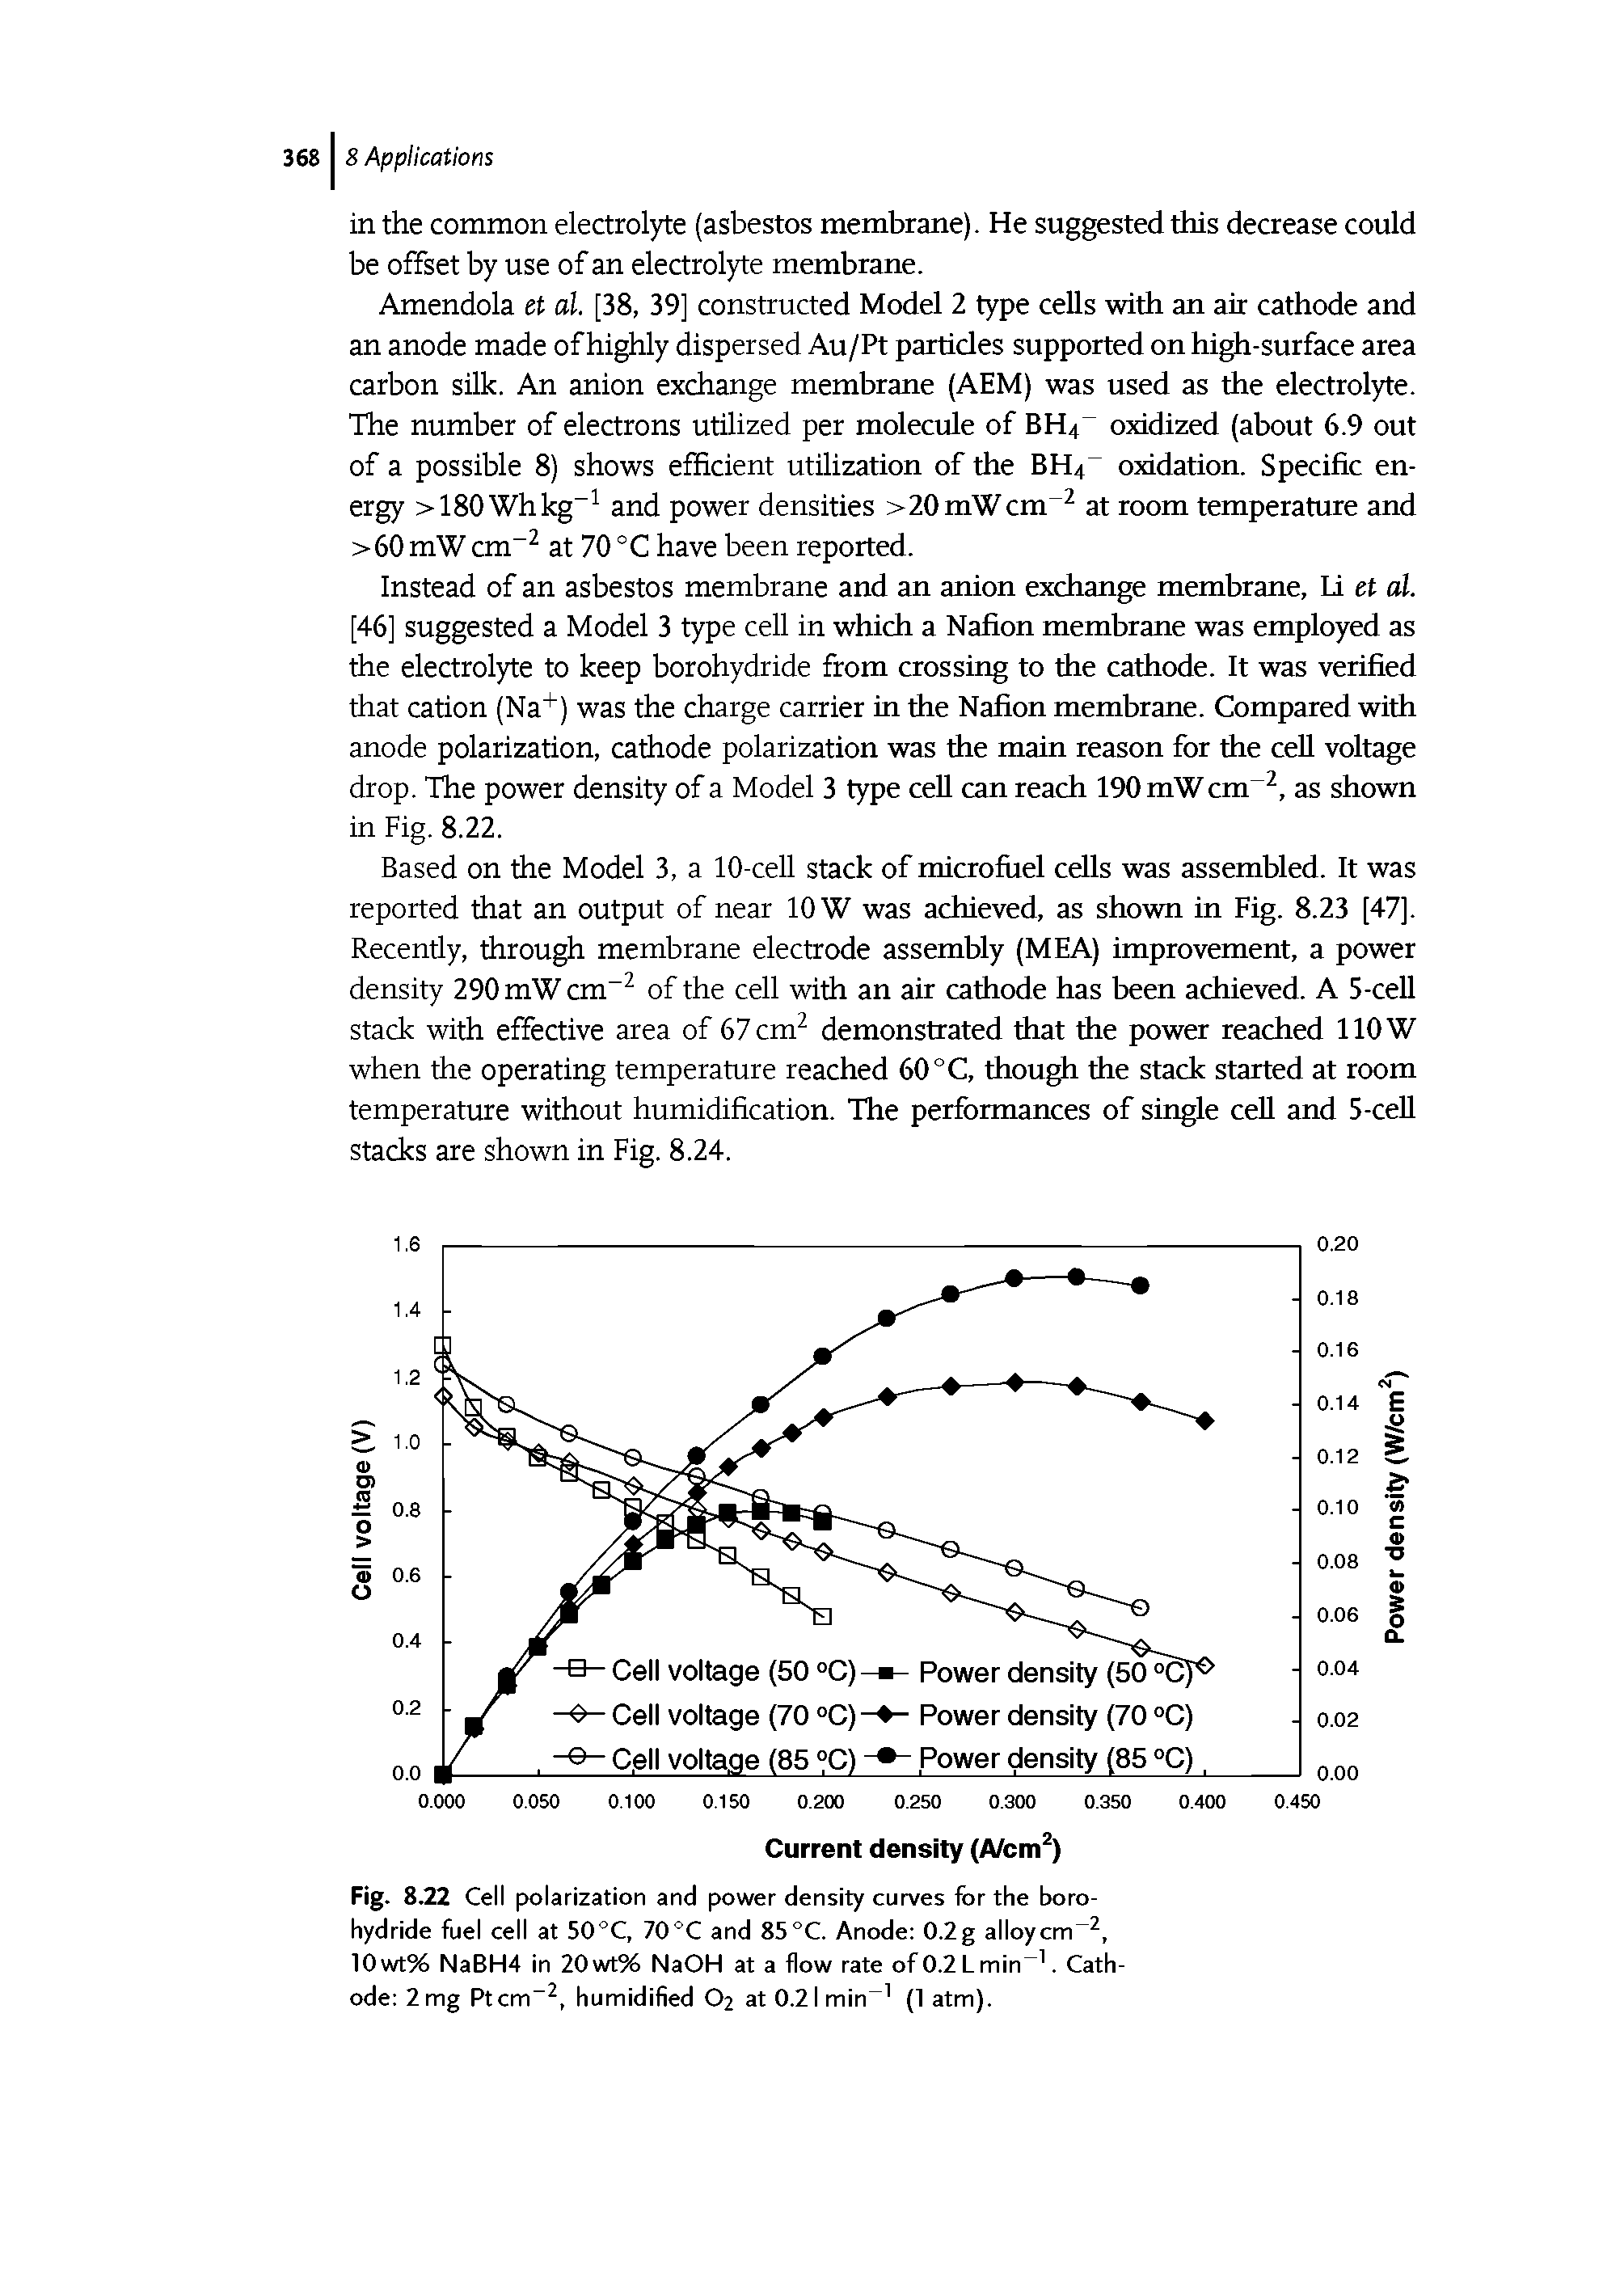 Fig. 8.22 Cell polarization and power density curves for the borohydride fuel cell at 50°C, 70°C and 85°C. Anode 0.2g alloycm , 10wt% NaBH4 in 20wt% NaOH at a flow rate of0.2Lmin h Cathode 2 mg Ptcm , humidified O2 at 0.21 min (1 atm).